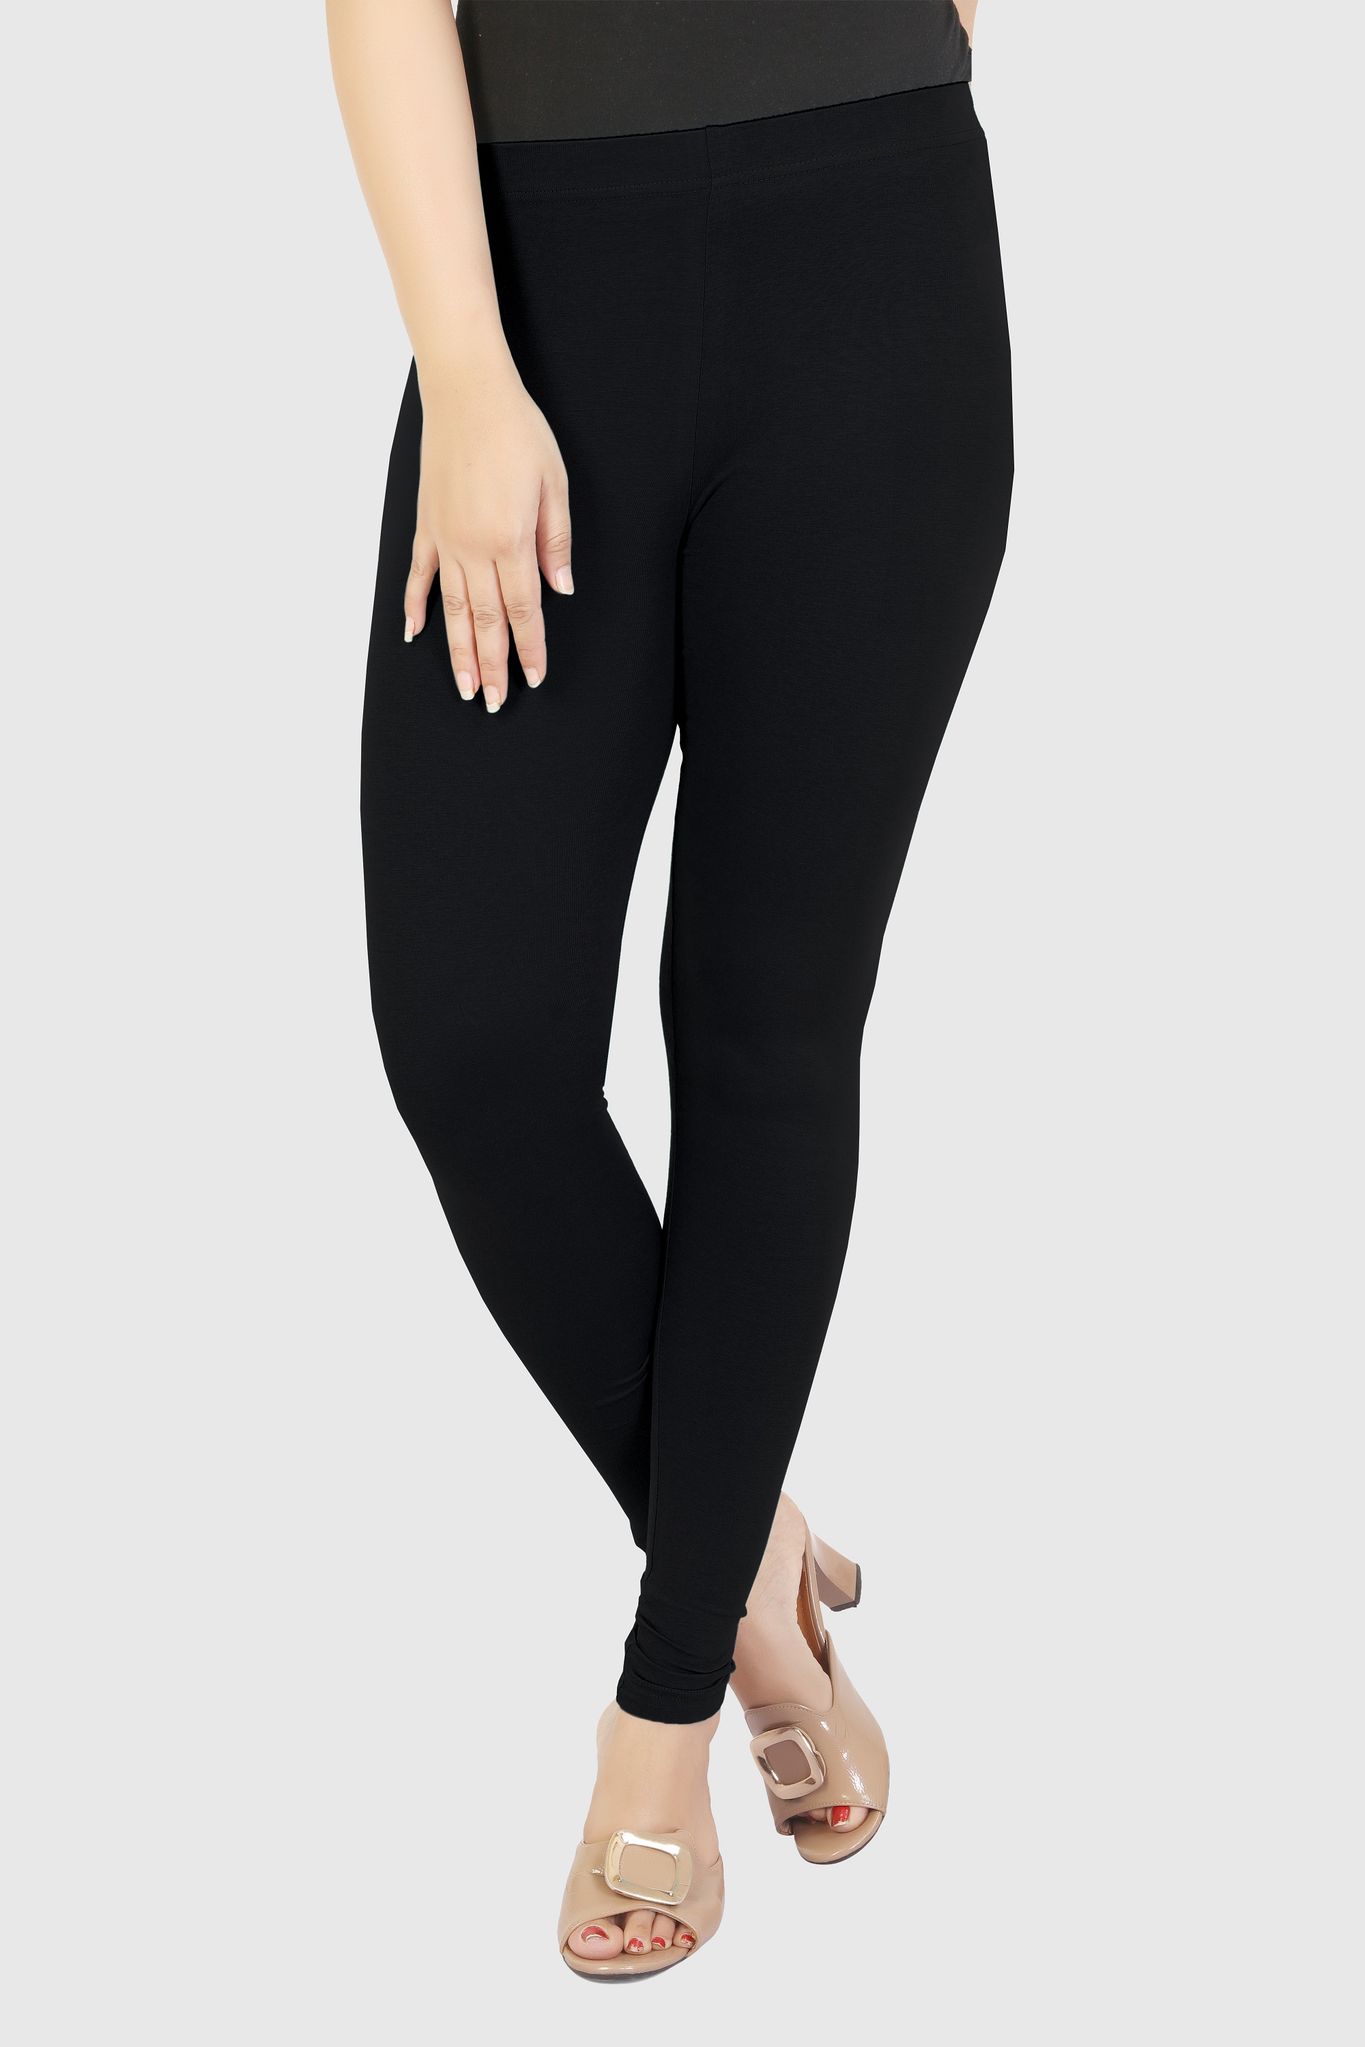 Cord High Waisted Leggings | M&S Collection | M&S